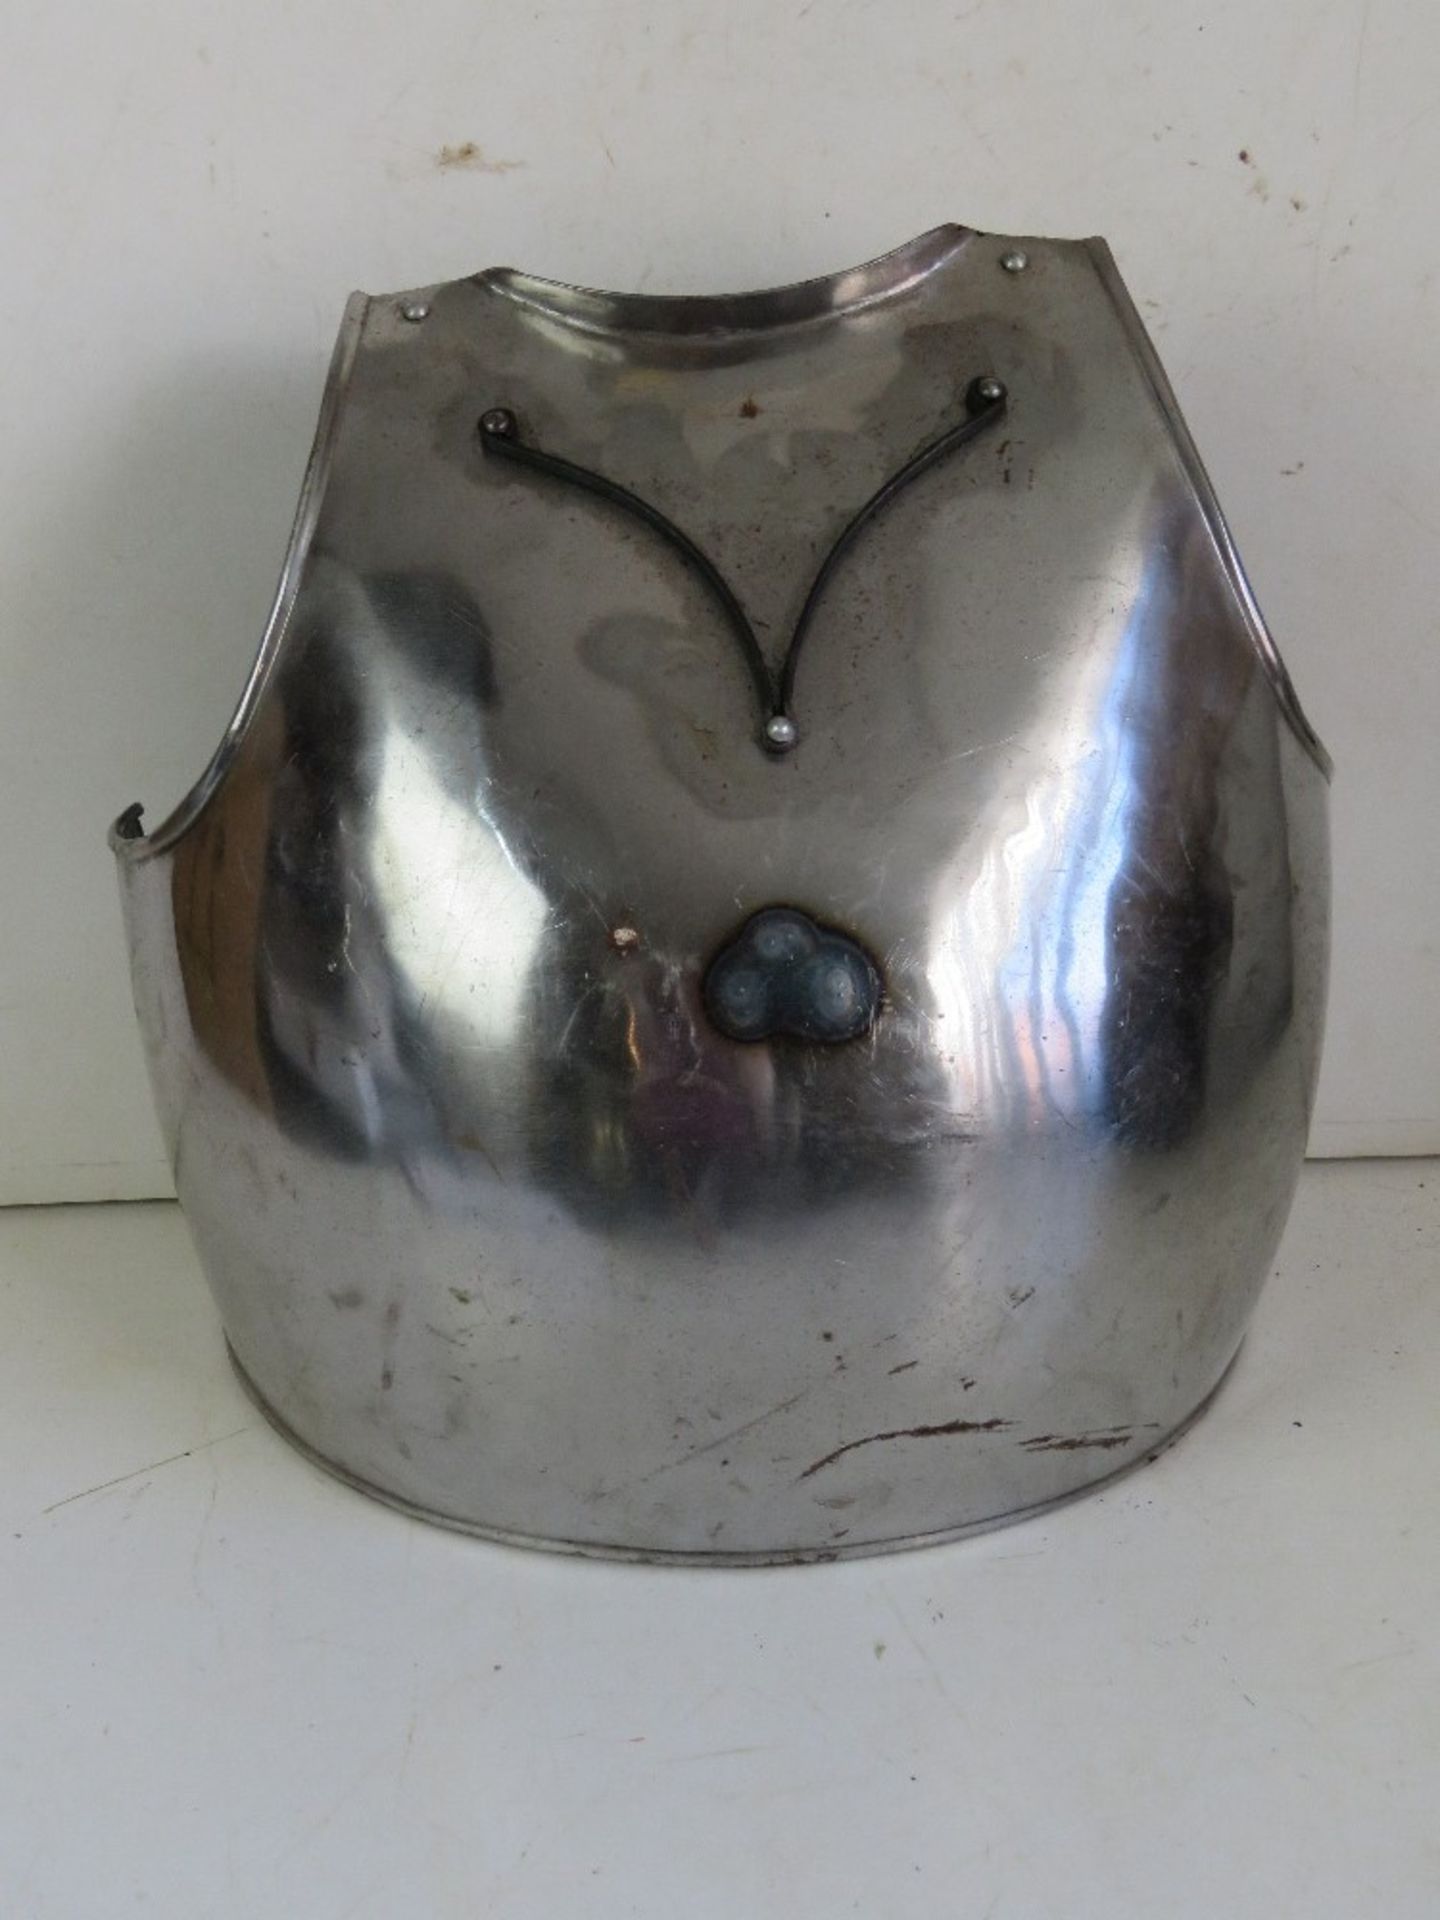 A reproduction civil war front armour plate with straps. For decorative purposes.